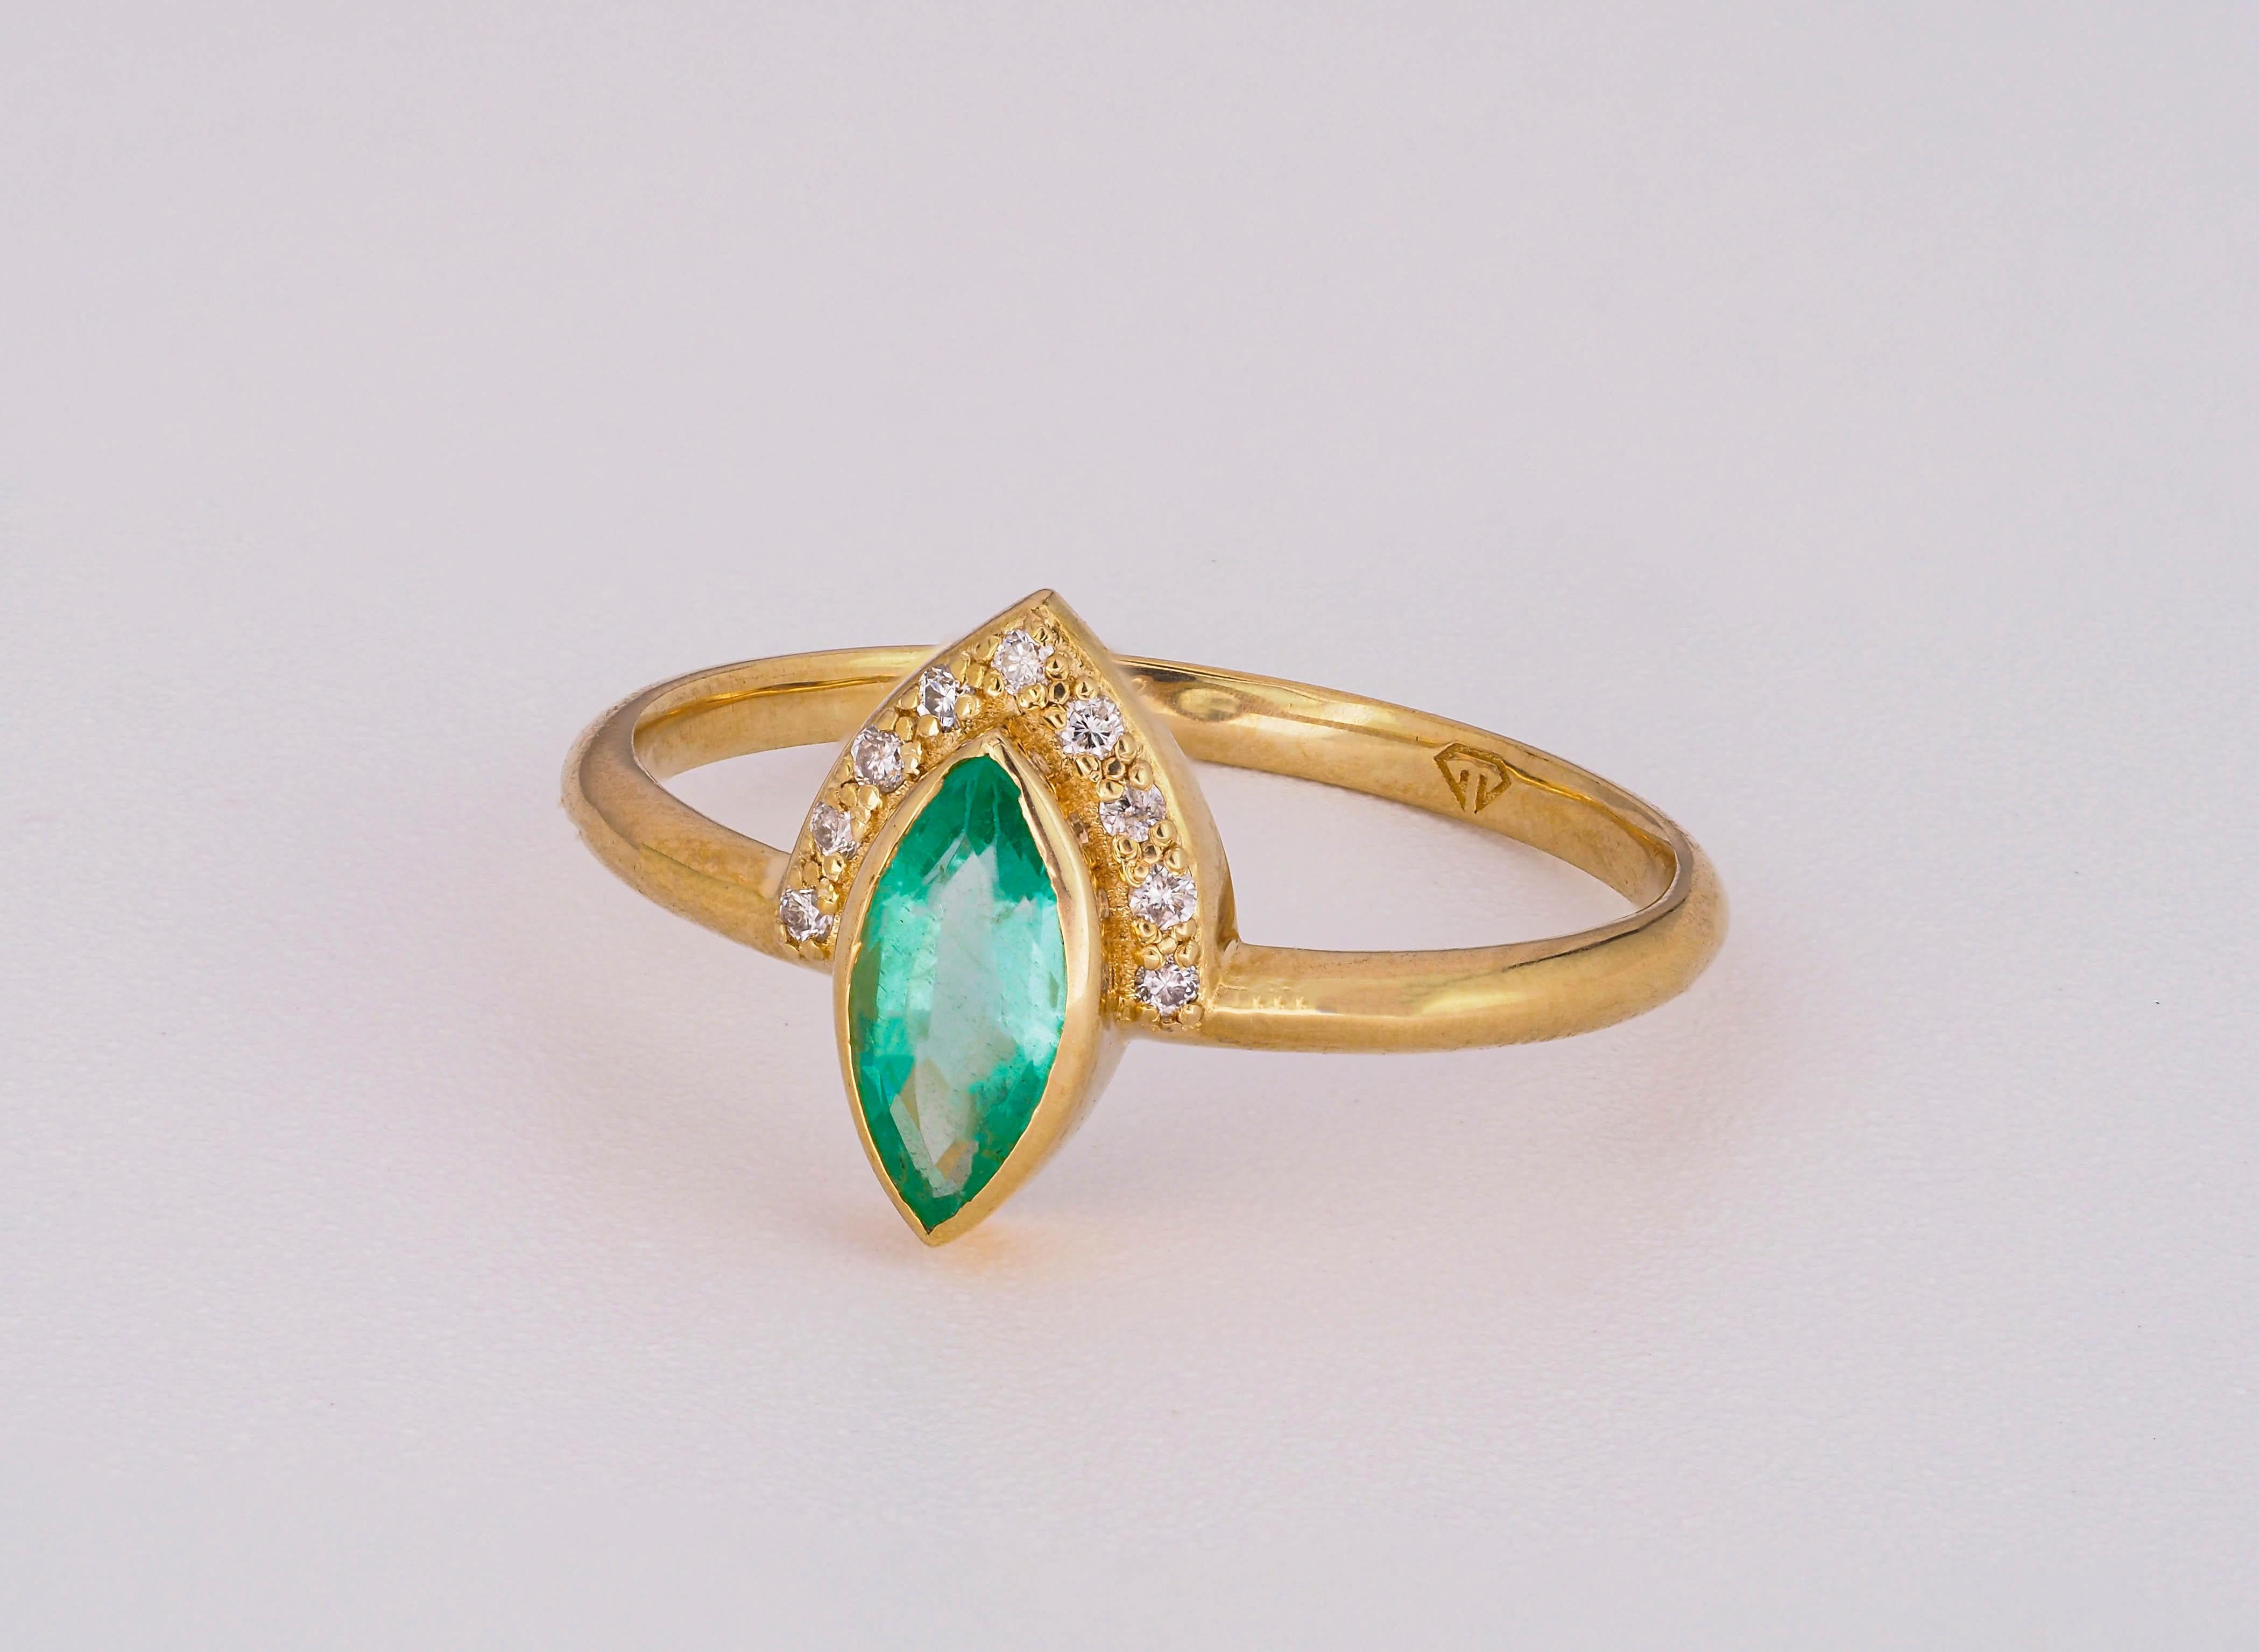 For Sale:  14 K Gold Ring with Marquise Cut Emerald and Diamonds 16